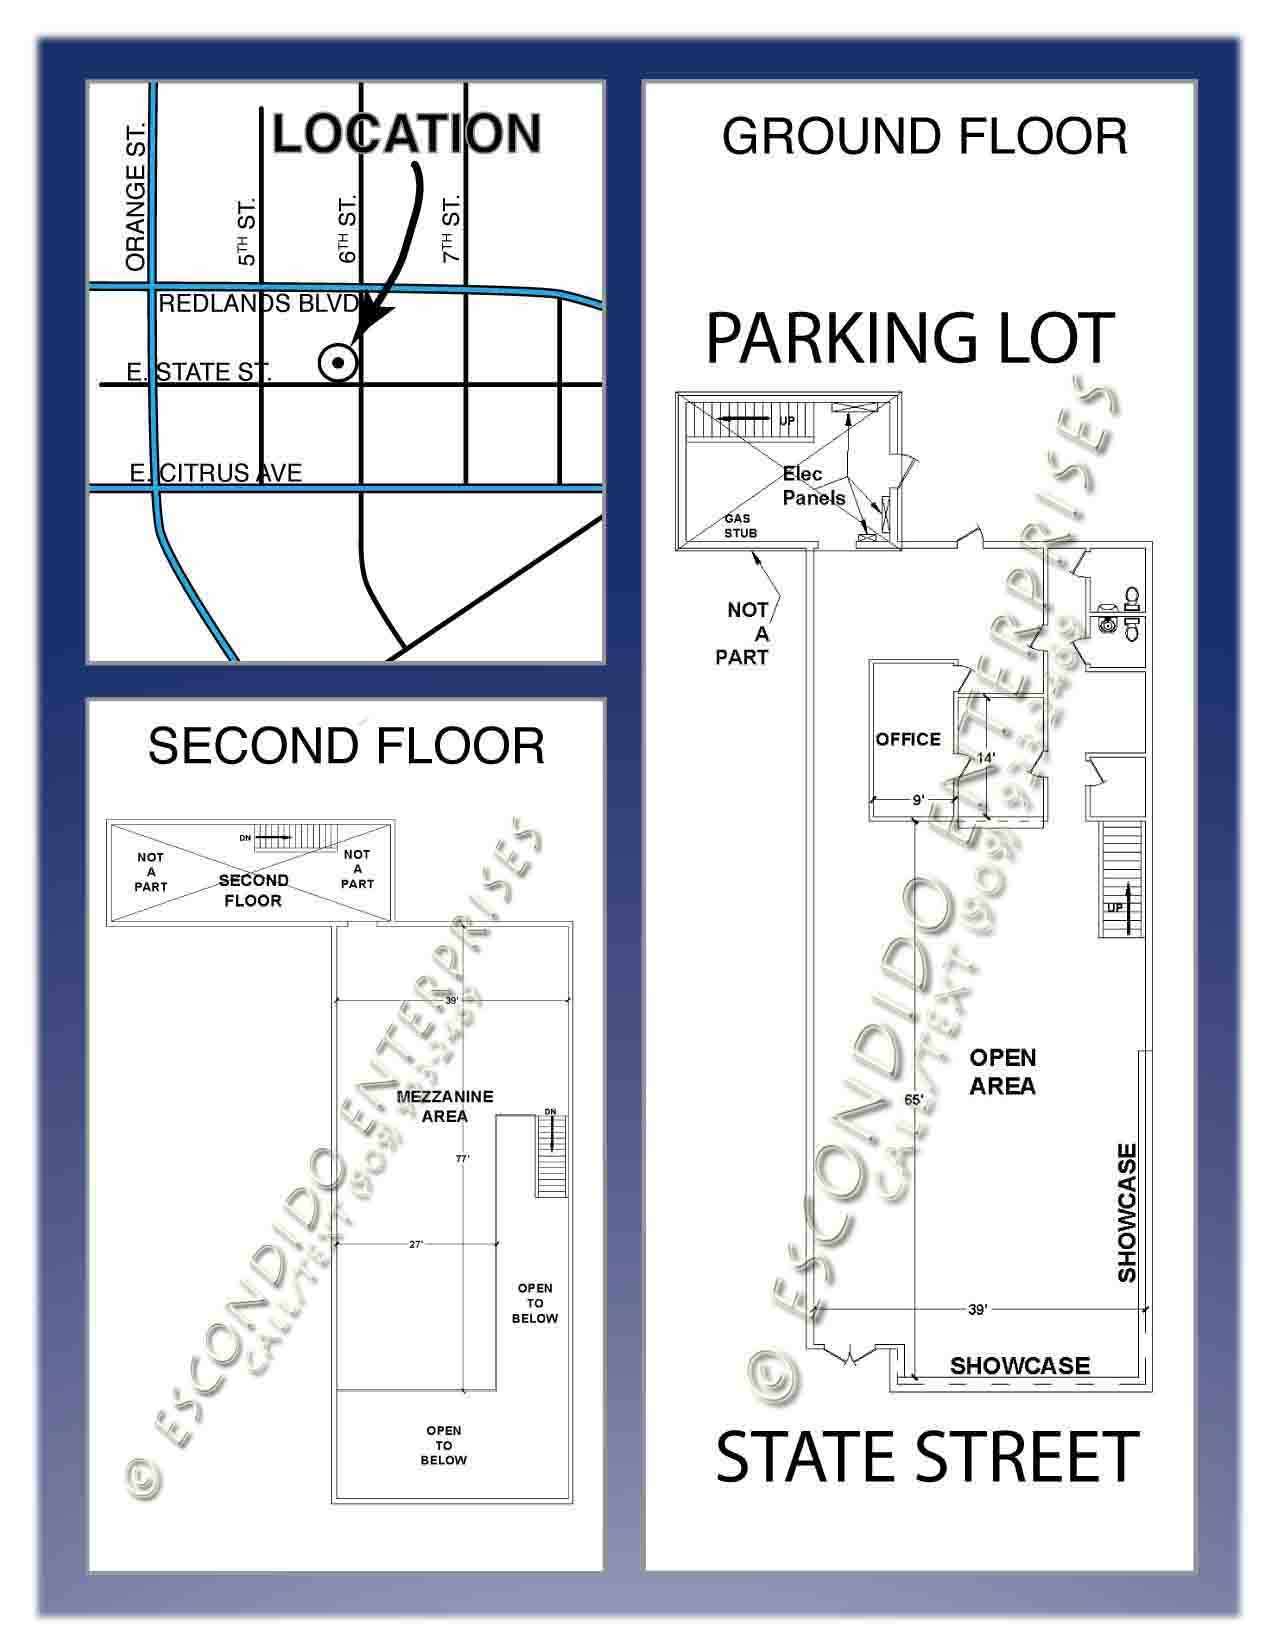 Brochure of office space located at 129 E. State St, Redlands, CA, 92373